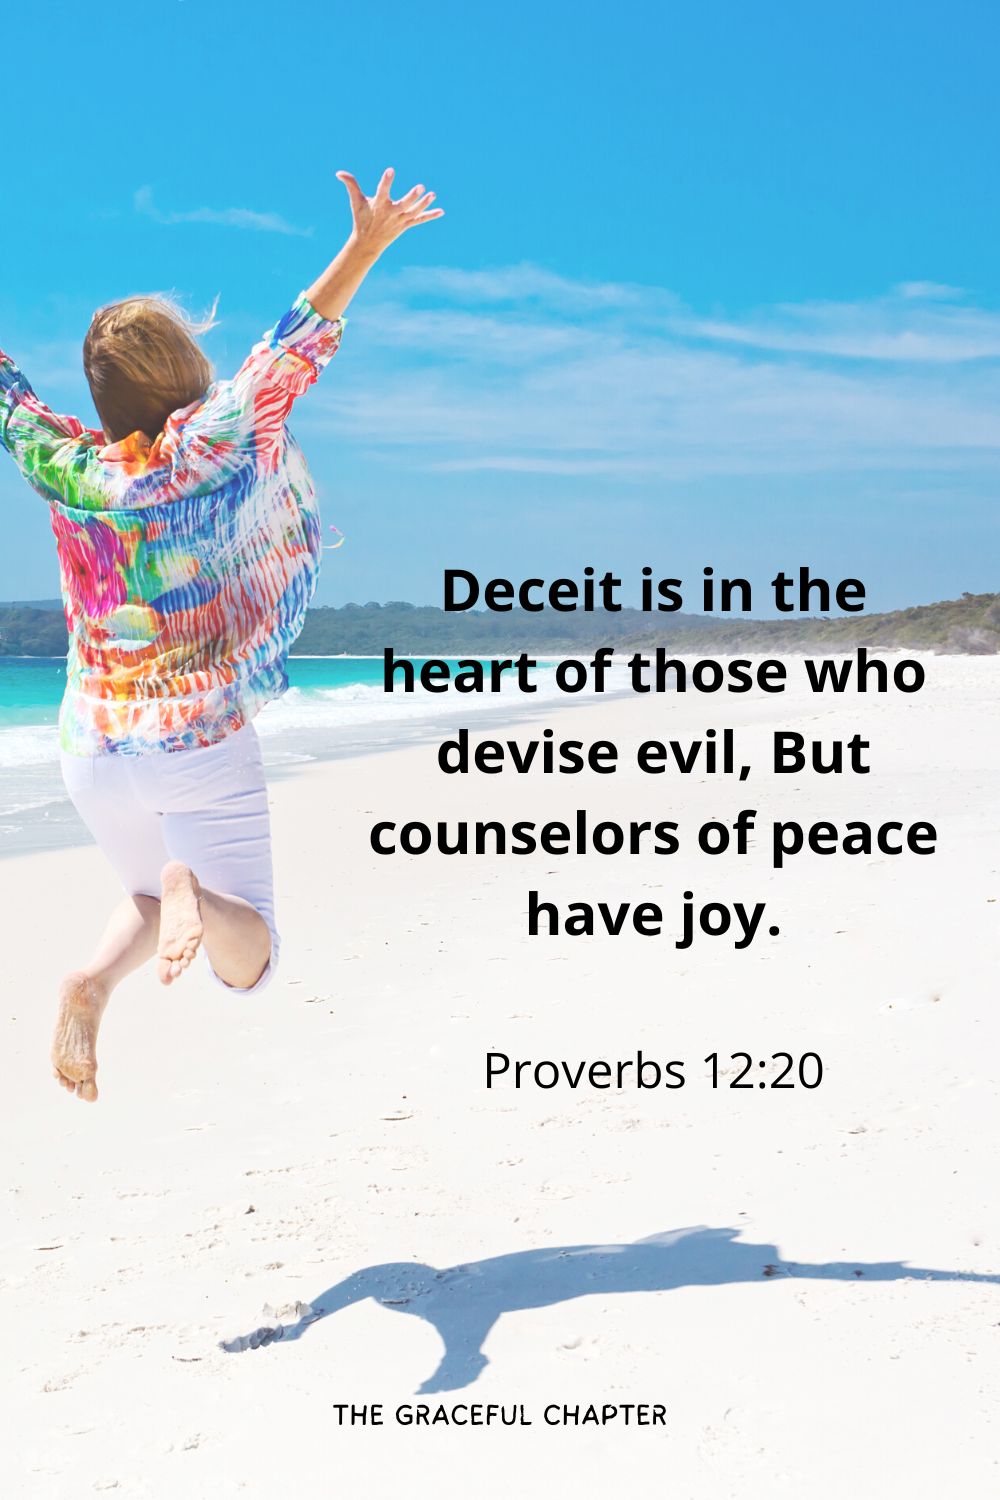 Deceit is in the heart of those who devise evil, But counselors of peace have joy.